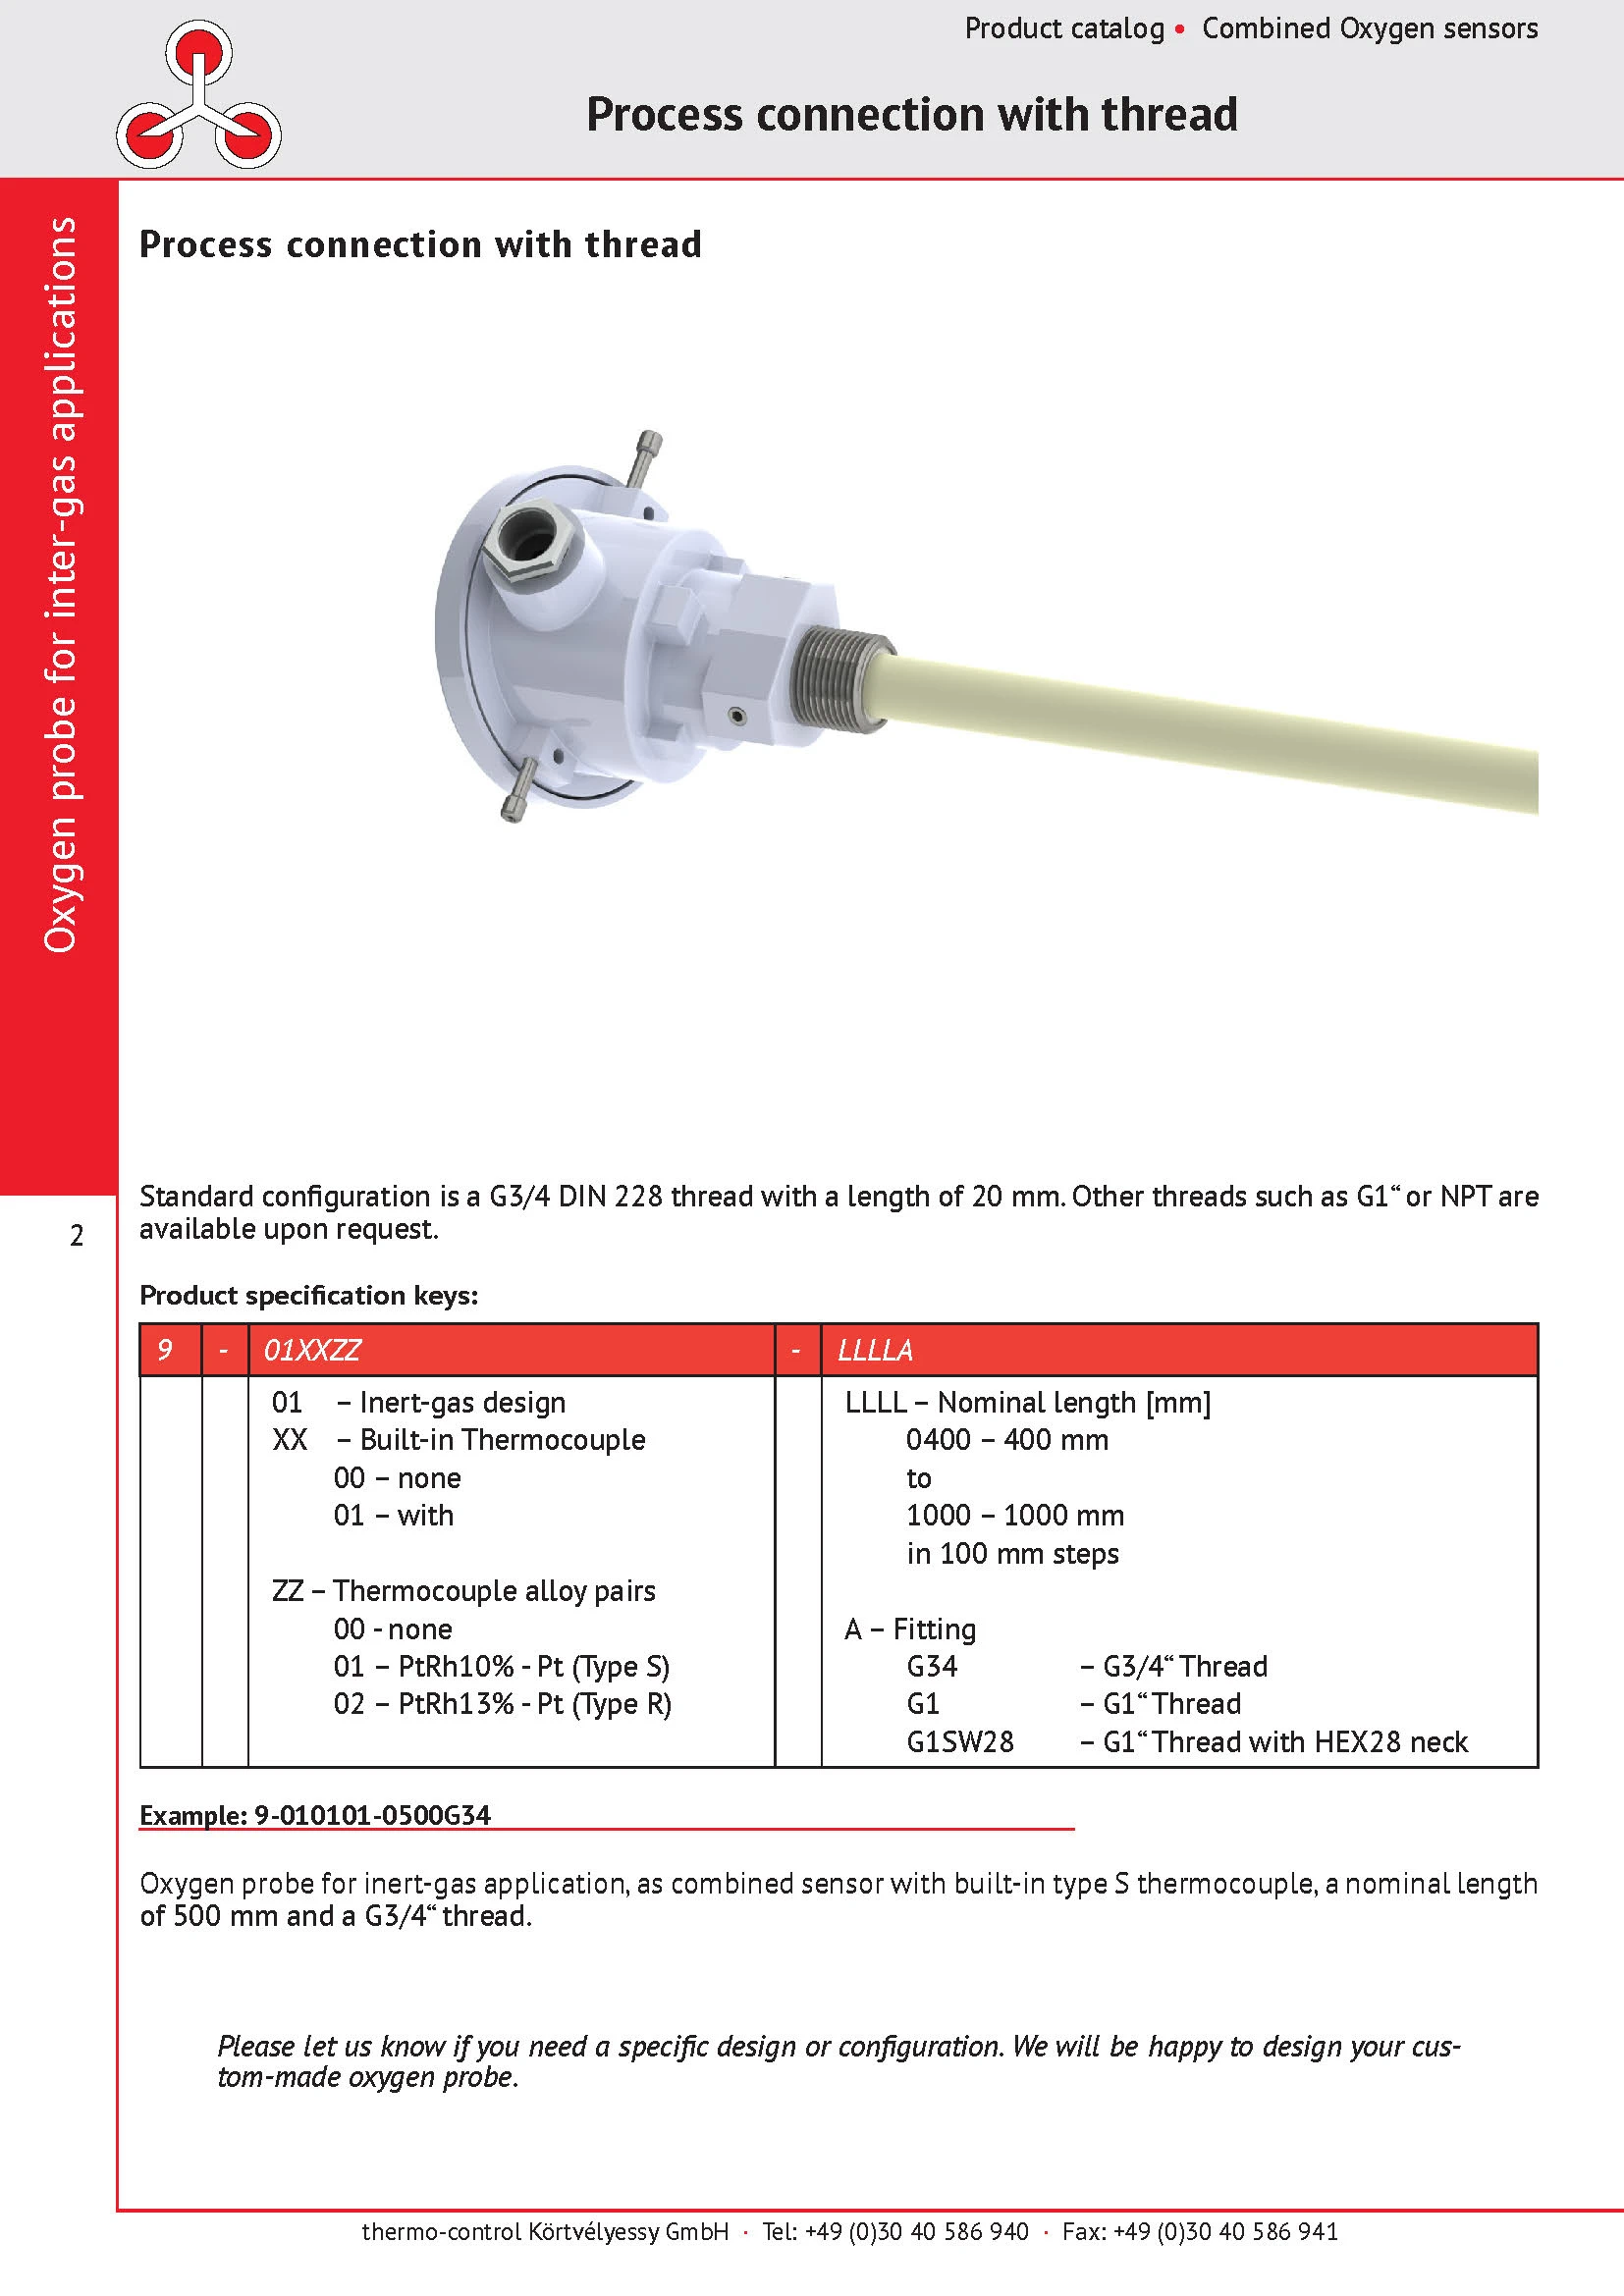 thermo-control Körtvélyessy - Catalog for inert gas oxygen probes threaded fitting